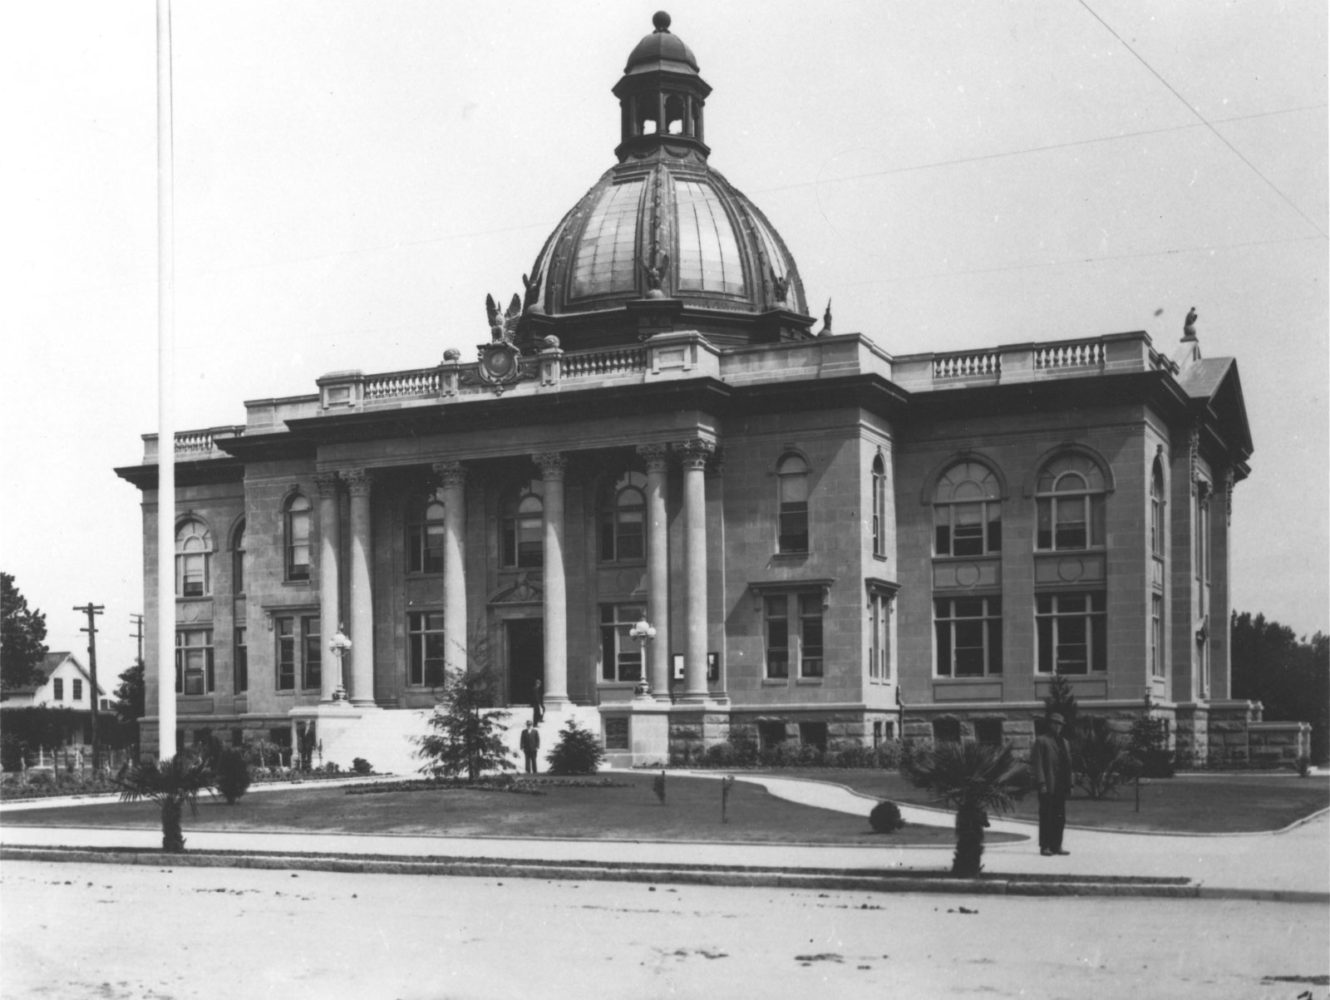 1915 photo of San Mateo County Temple of Justice